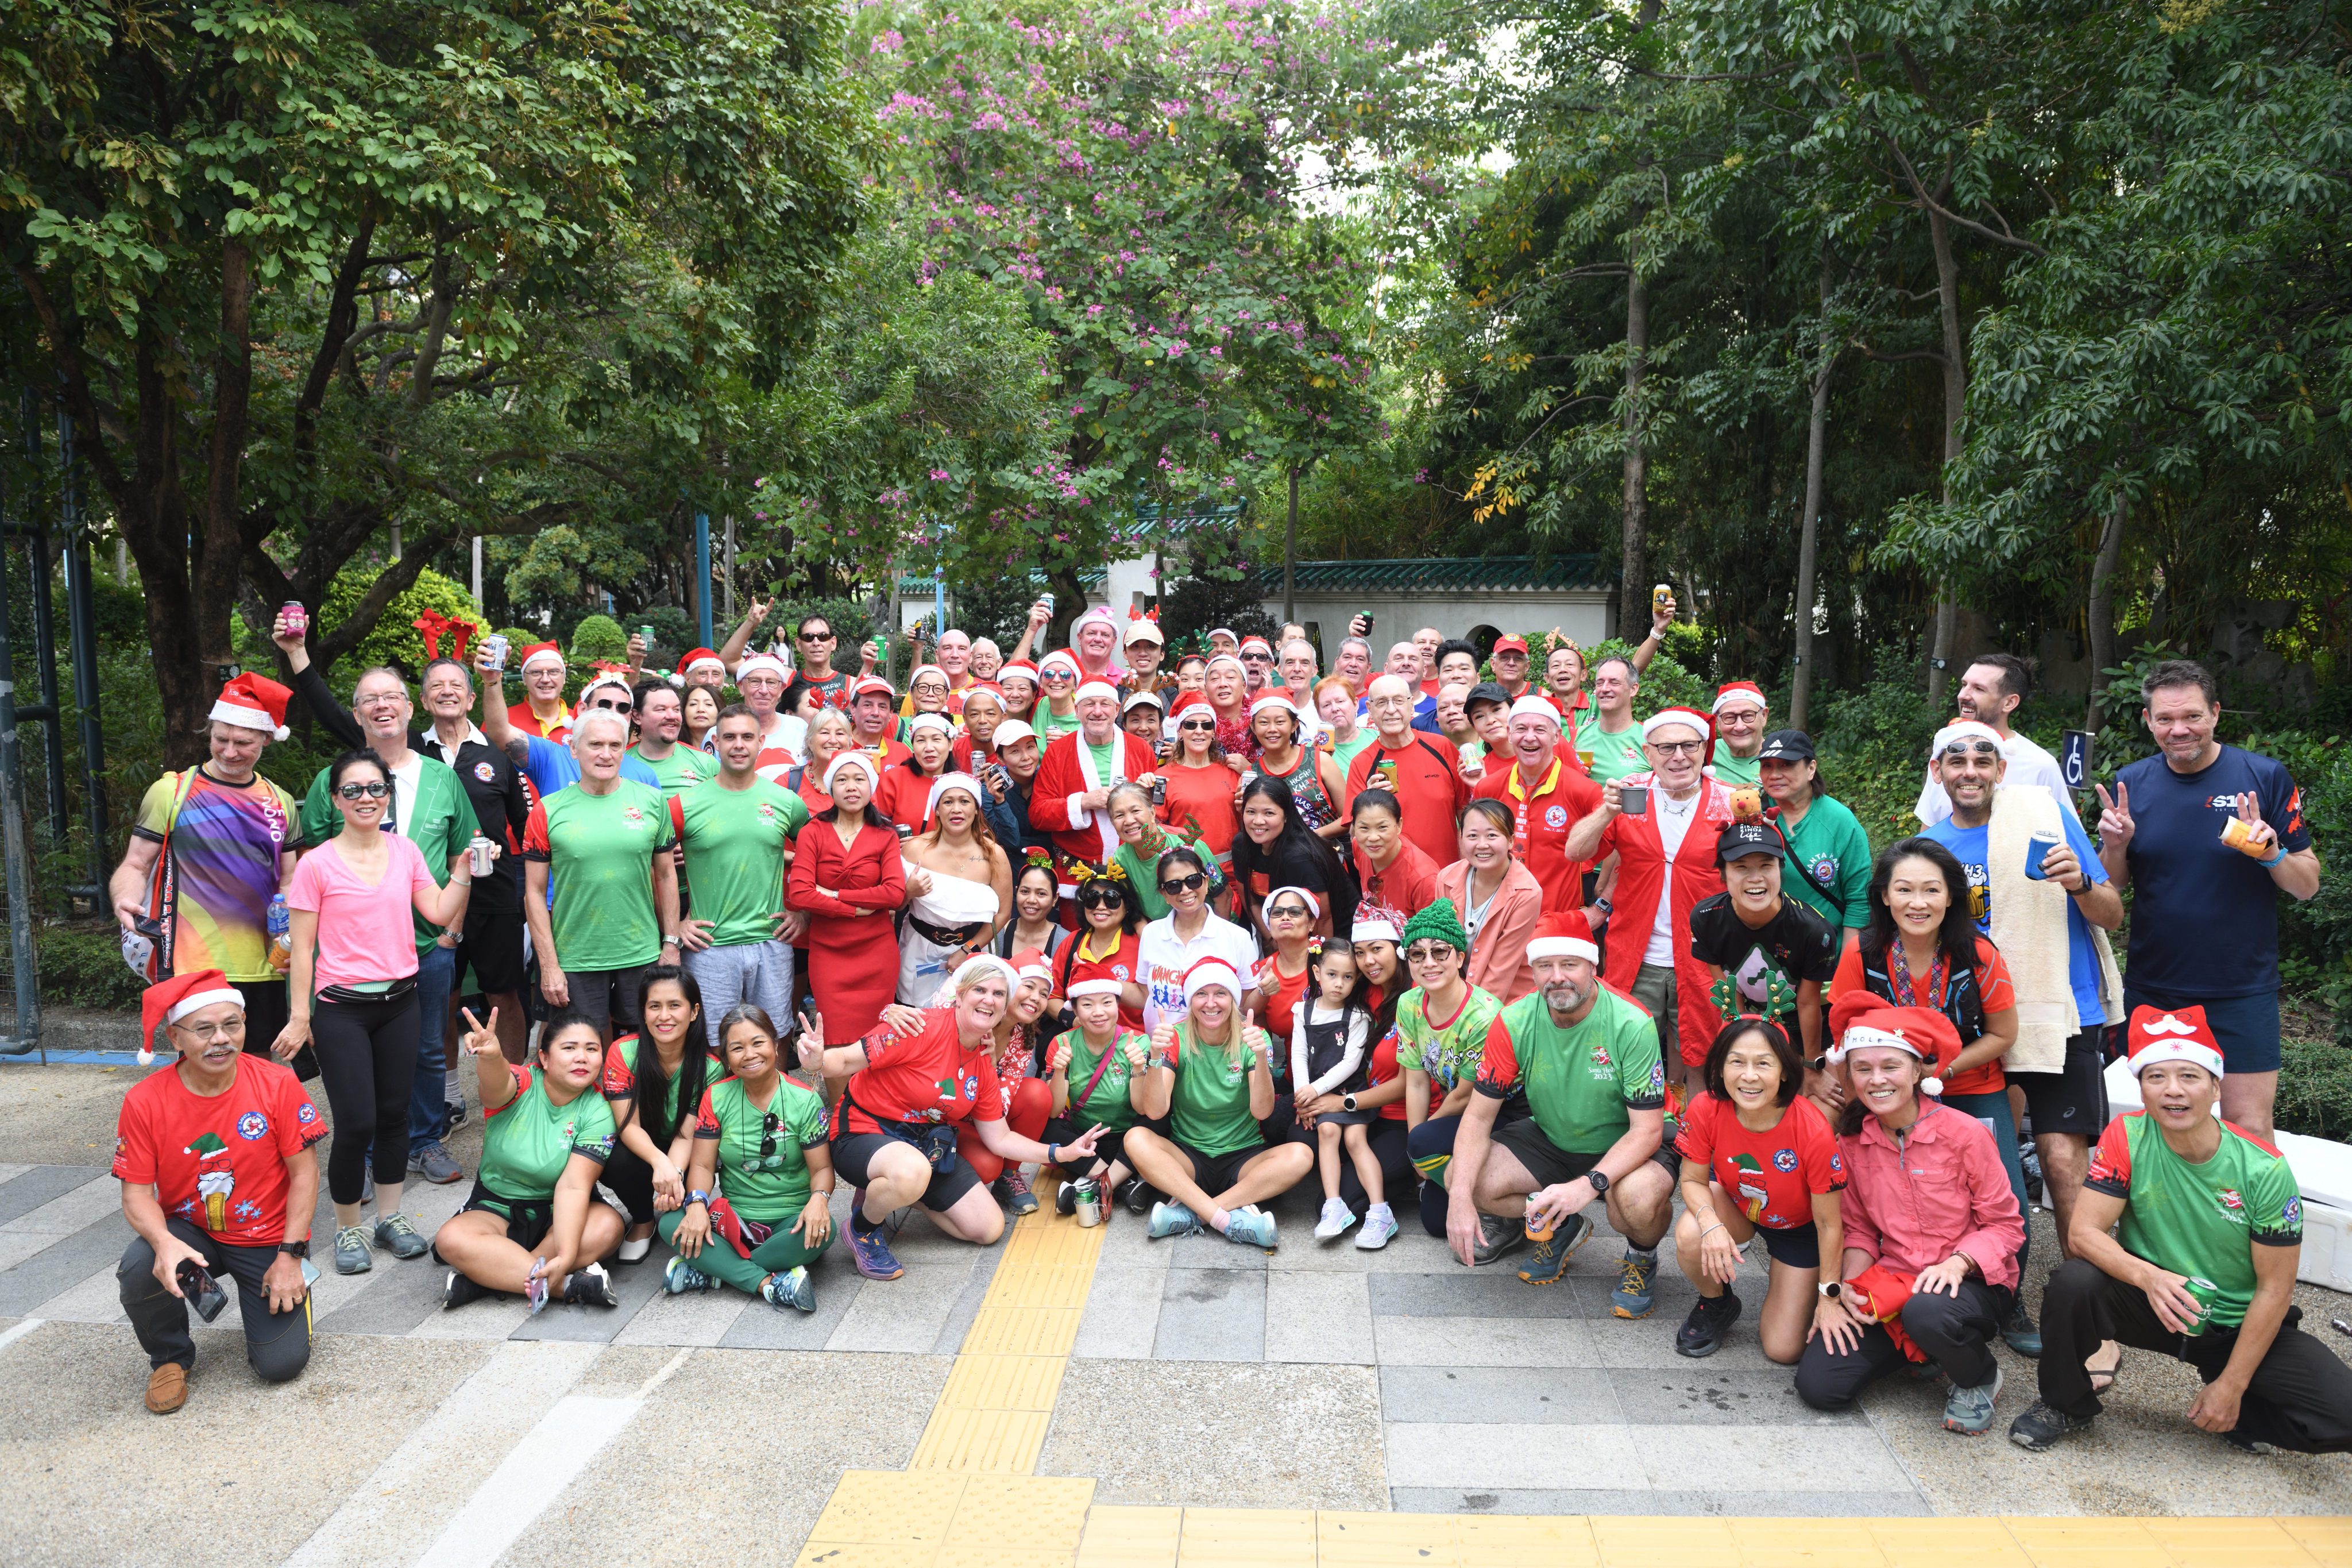 About 140 runners gathered at Lai Chi Kok Park on December 9 for a run similar to the old English game of hare and hounds. Photo: Handout